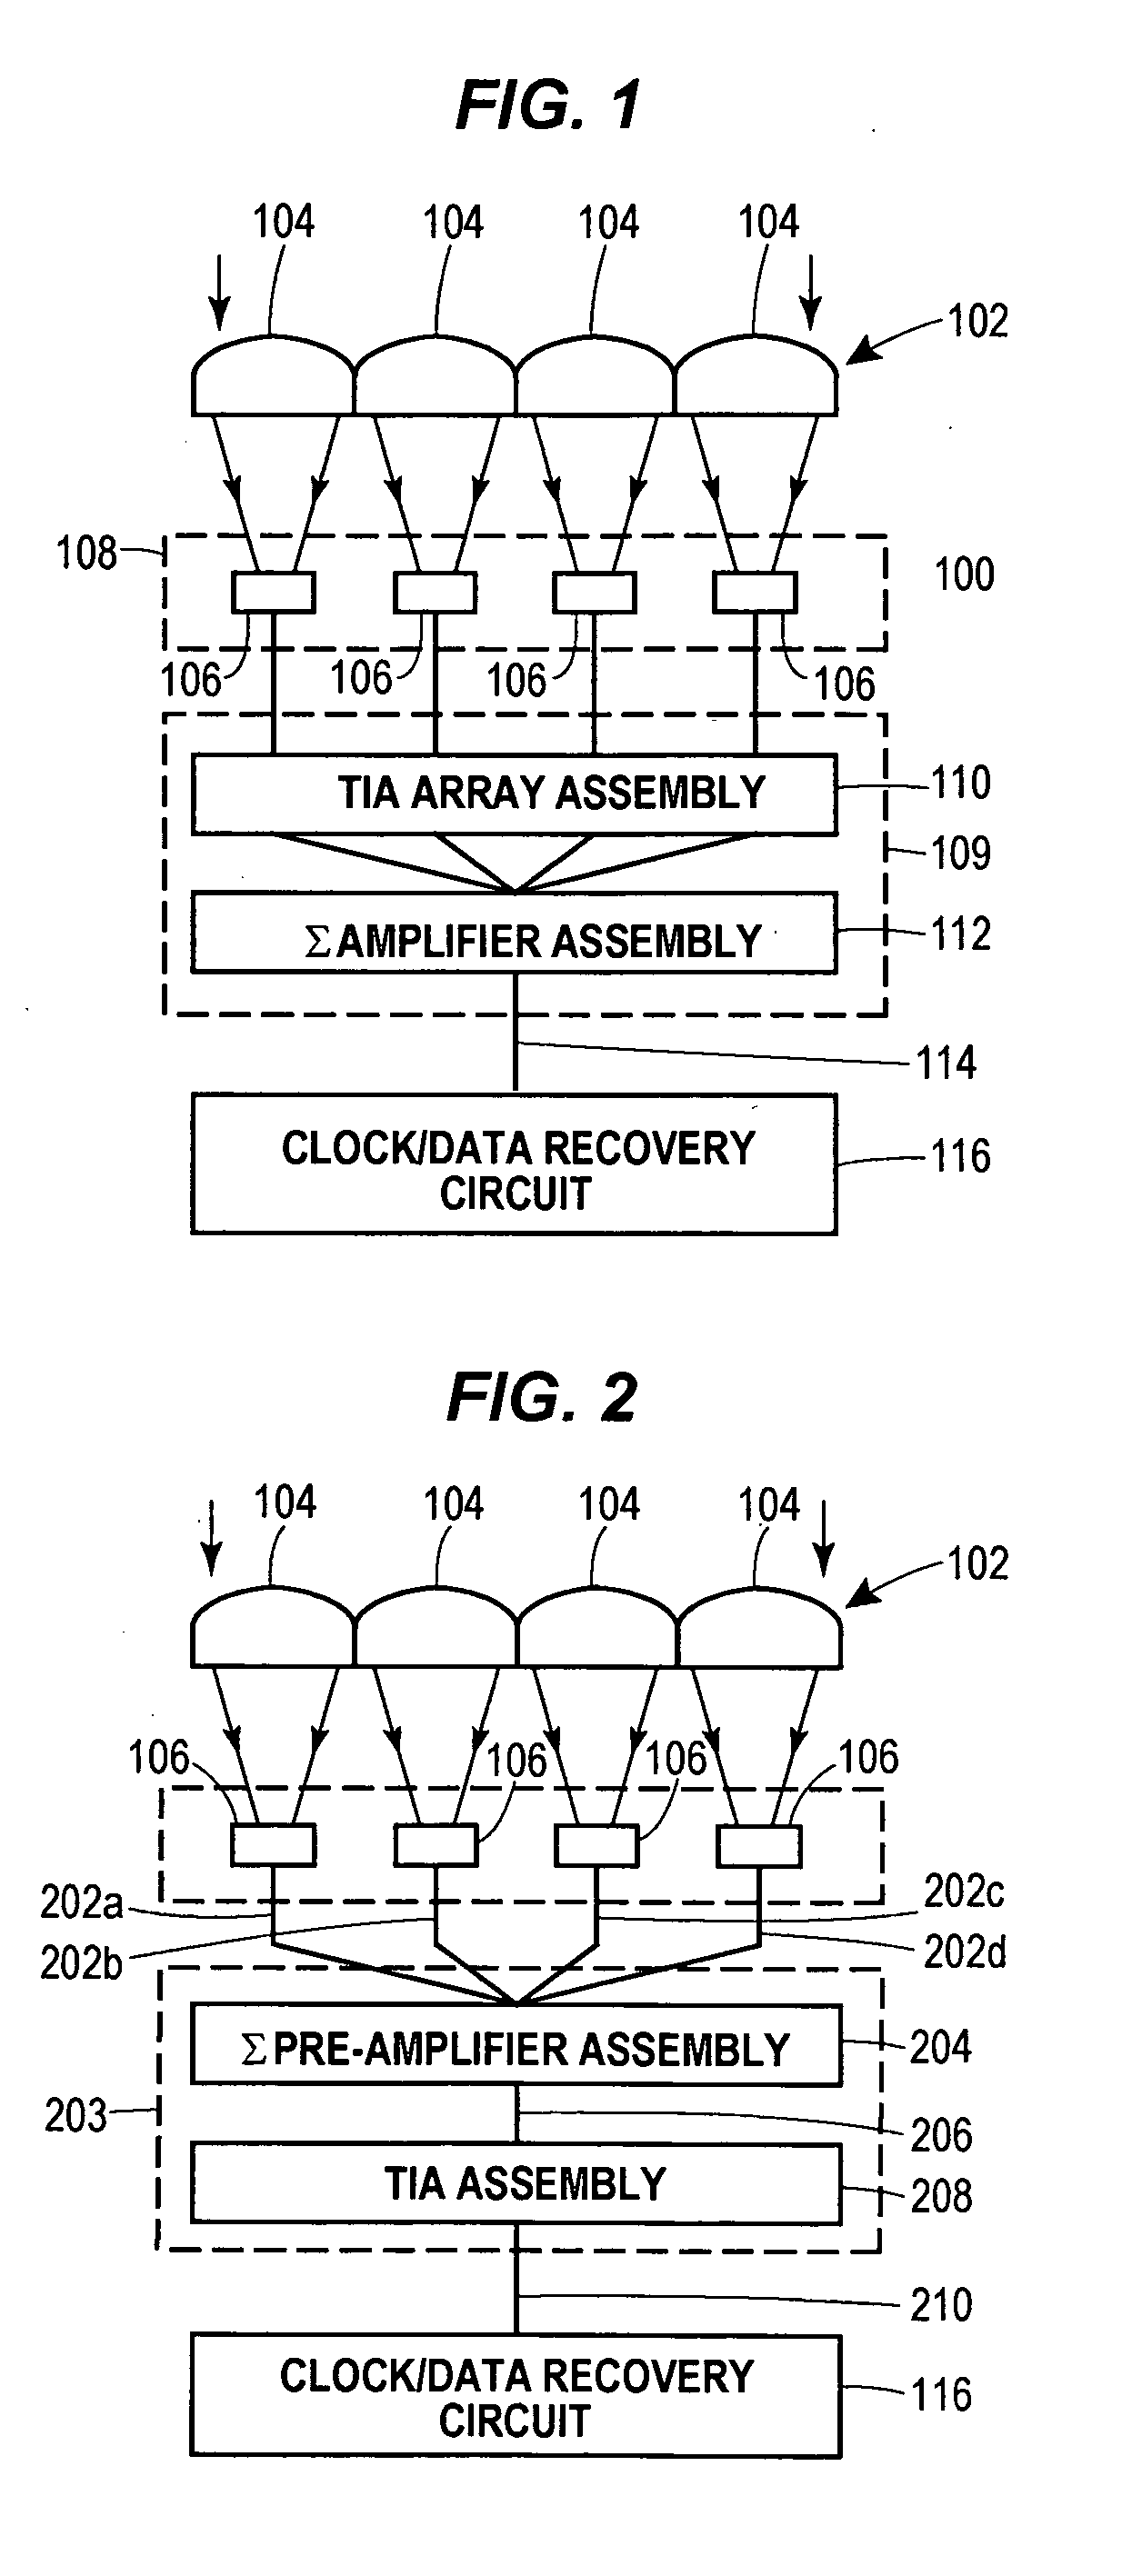 Lenslet/detector array assembly for high data rate optical communications